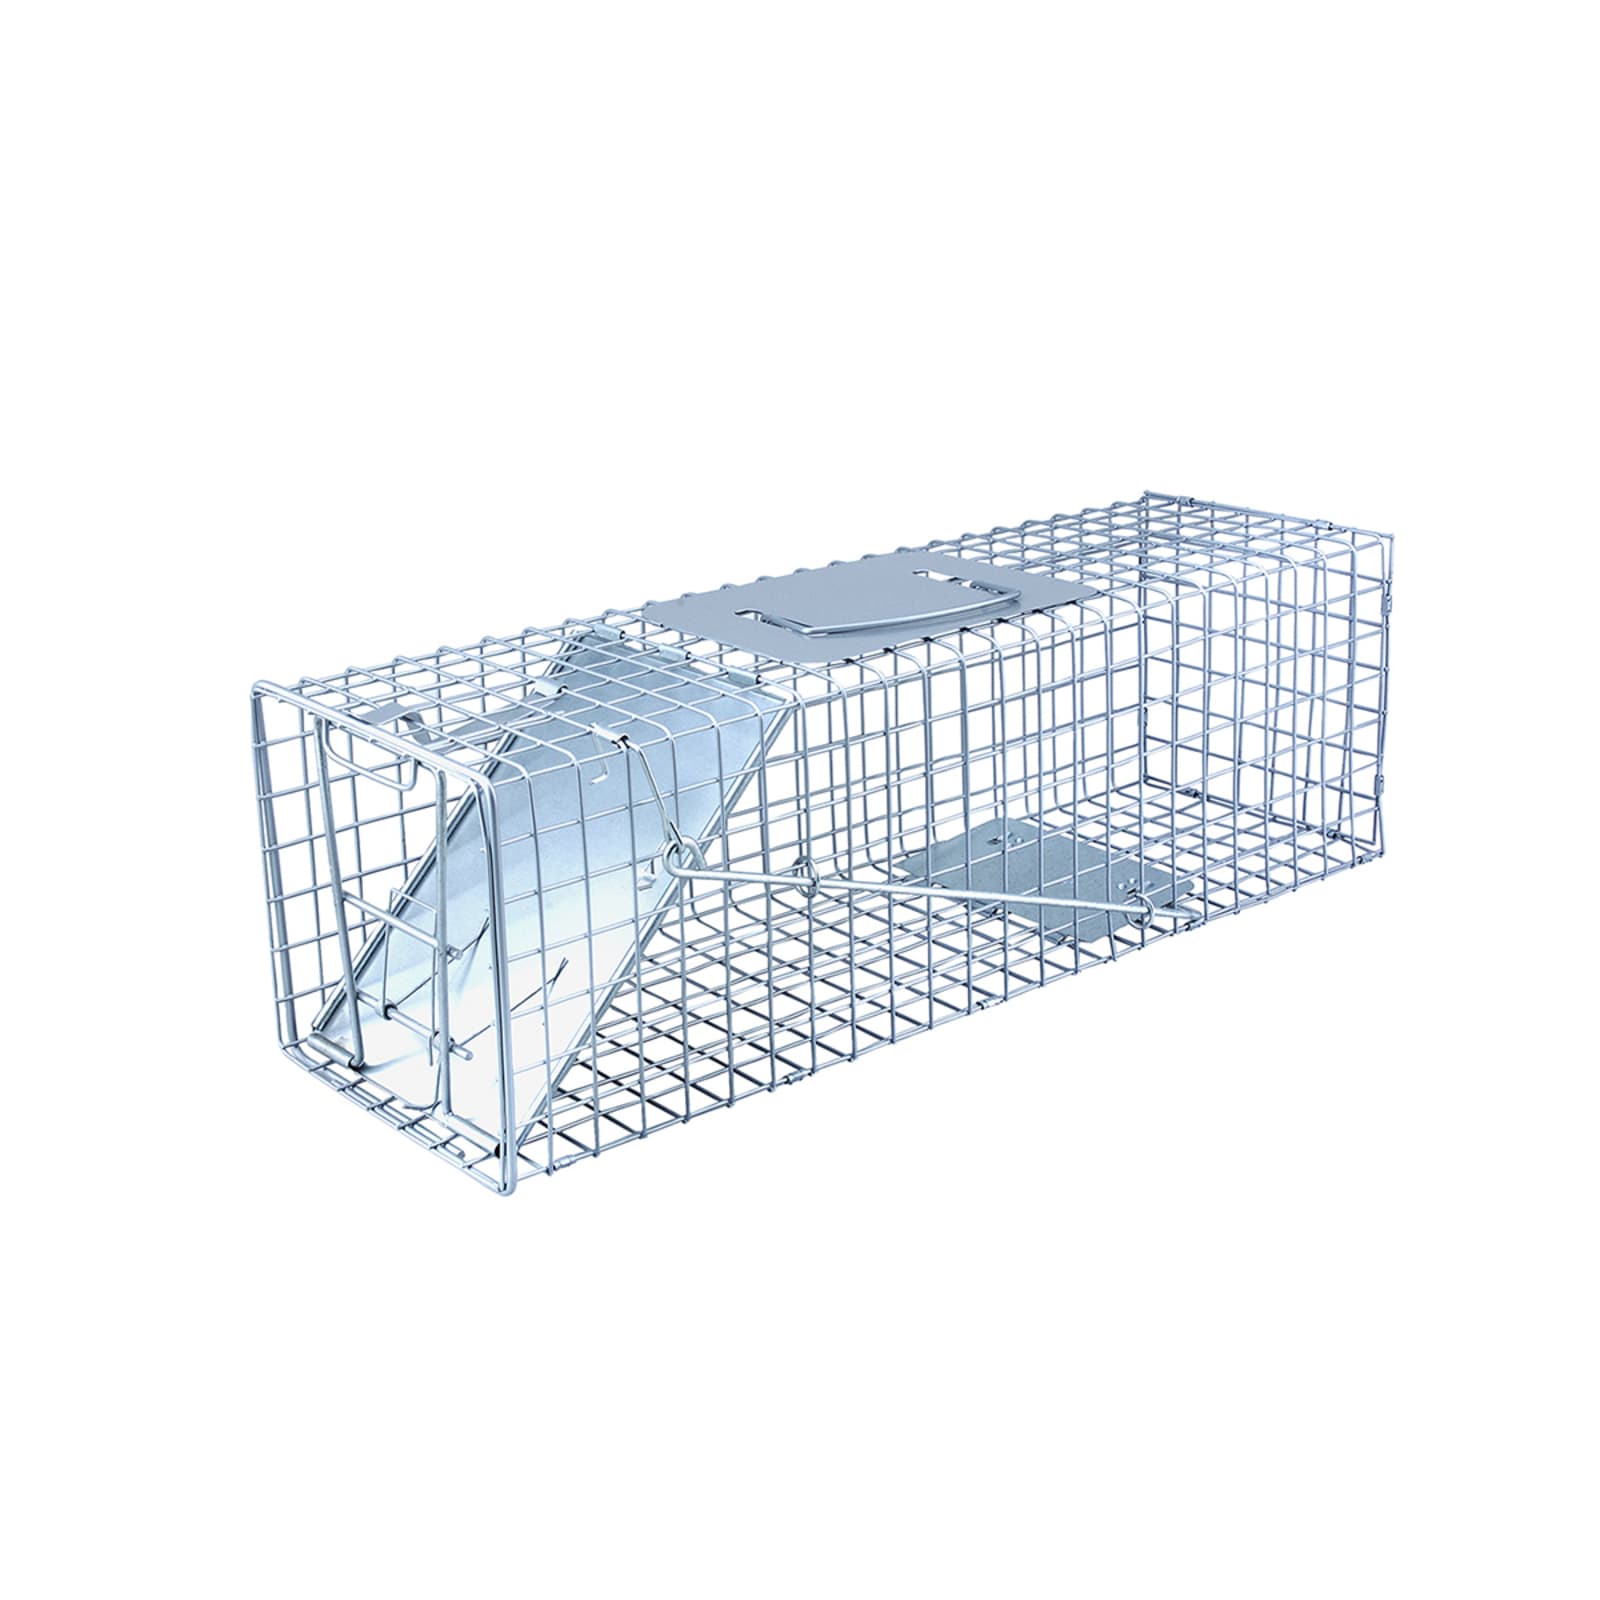 24'' Live Animal Trap Cage Skunks Squirrels Raccoons Small Game Rats